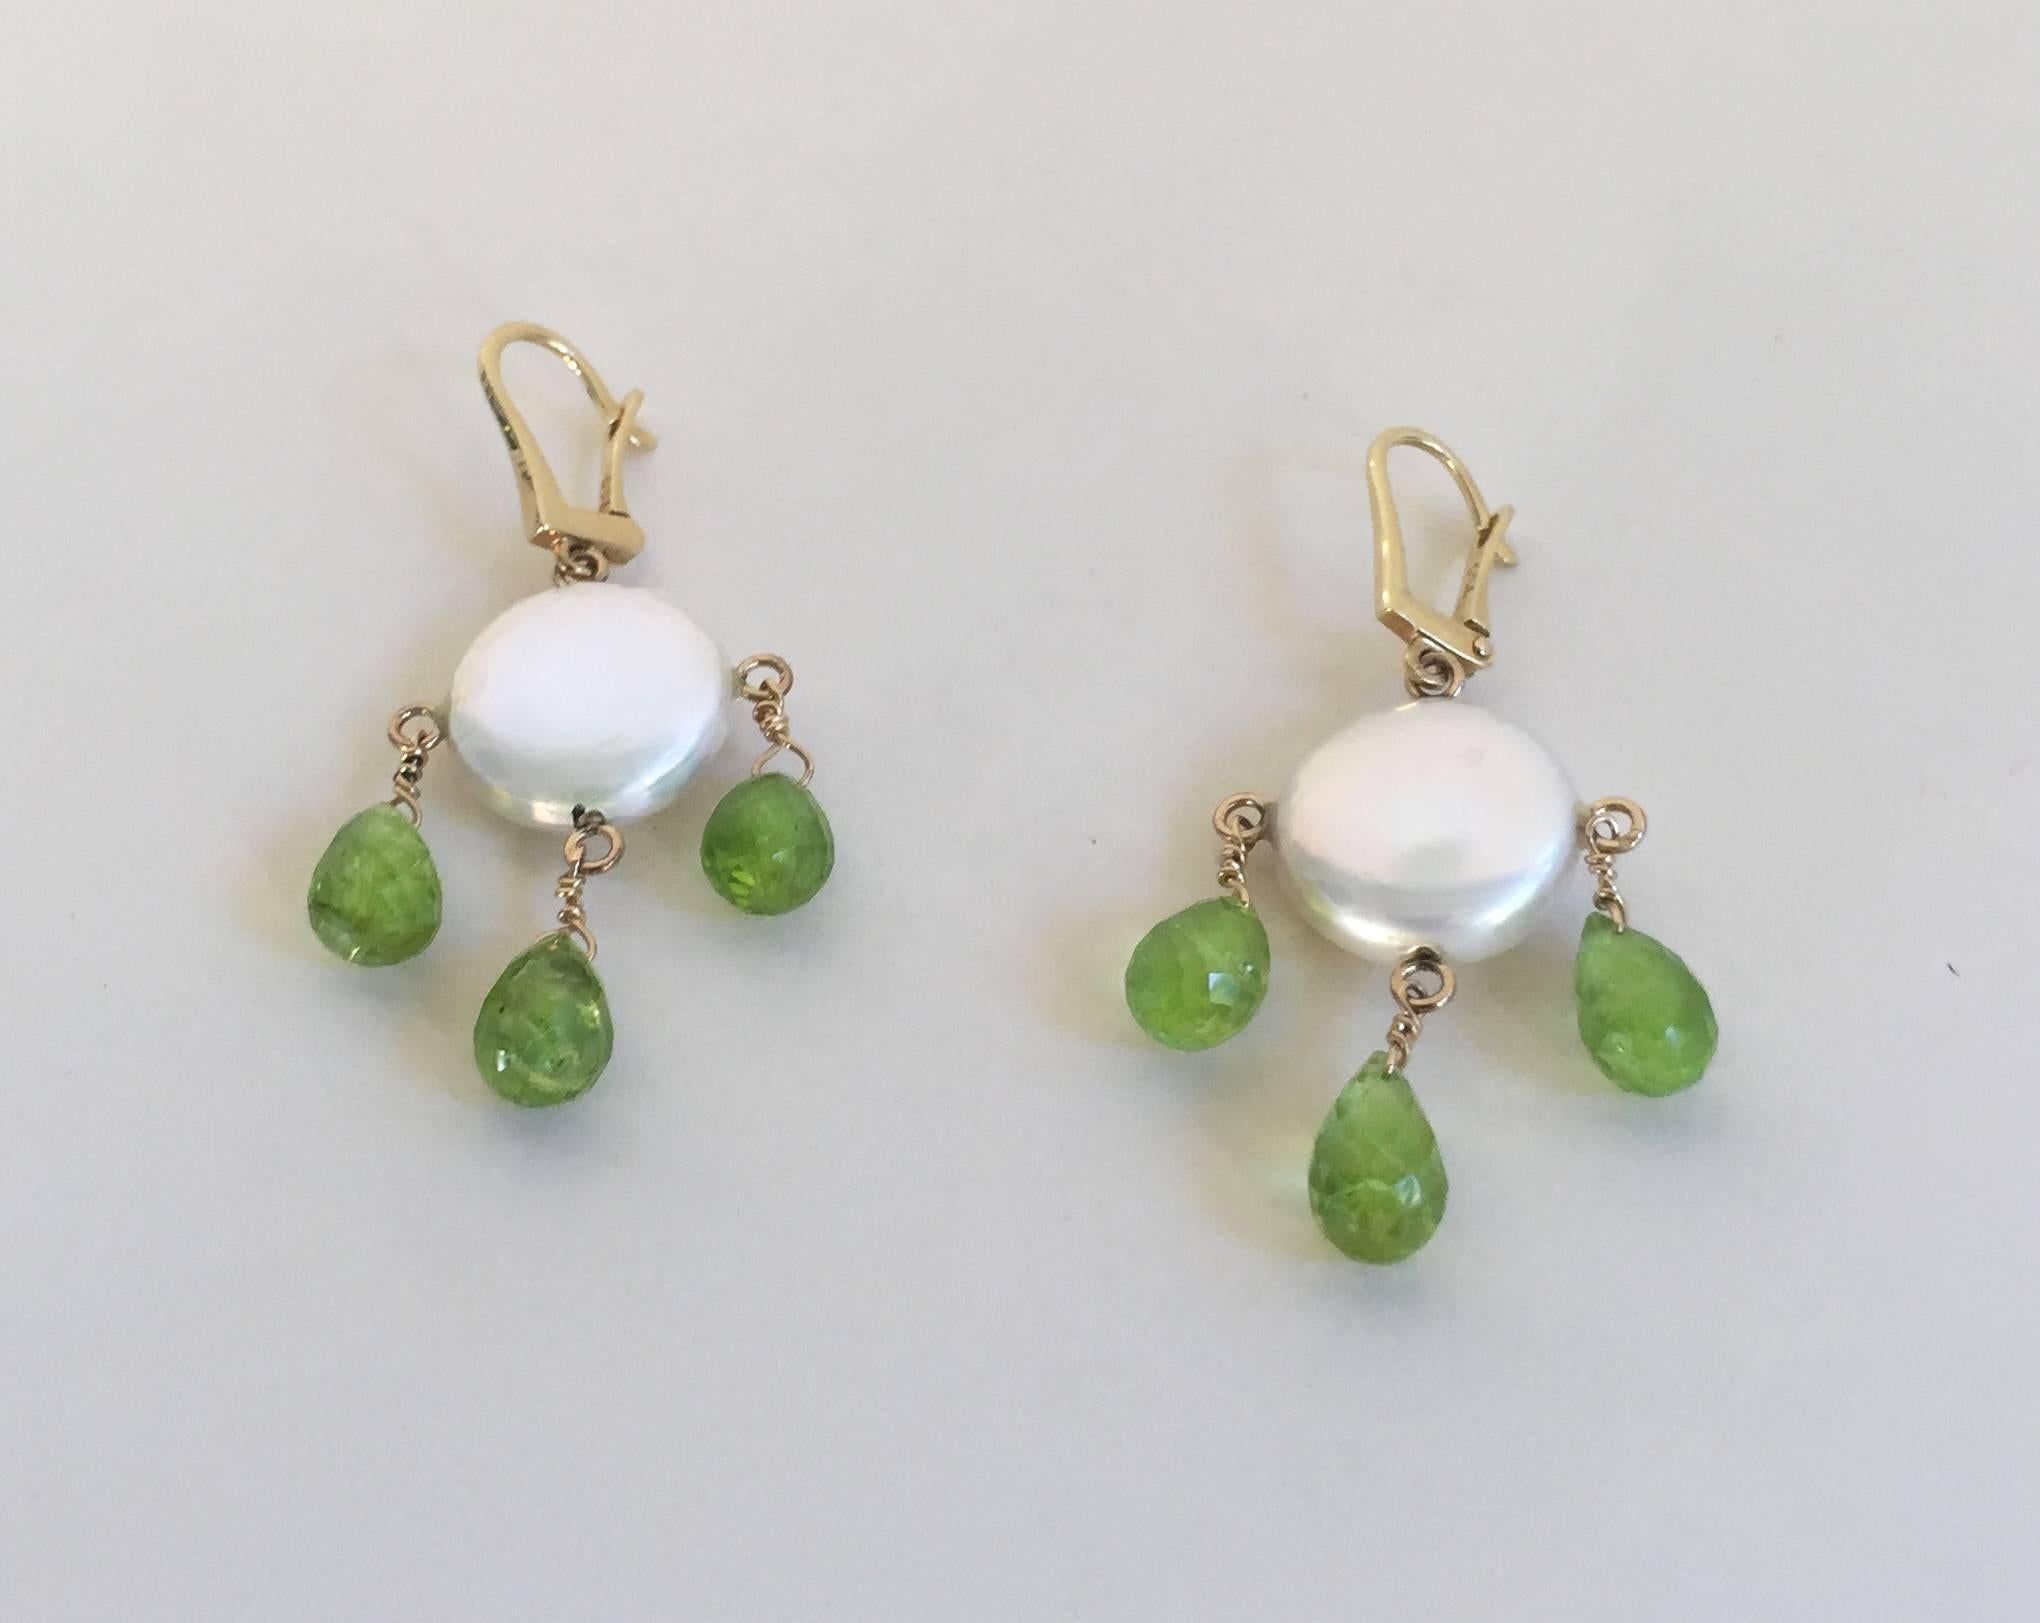 Women's Coin Pearl and Peridot Drop Earrings with 14 Karat Gold by Marina J